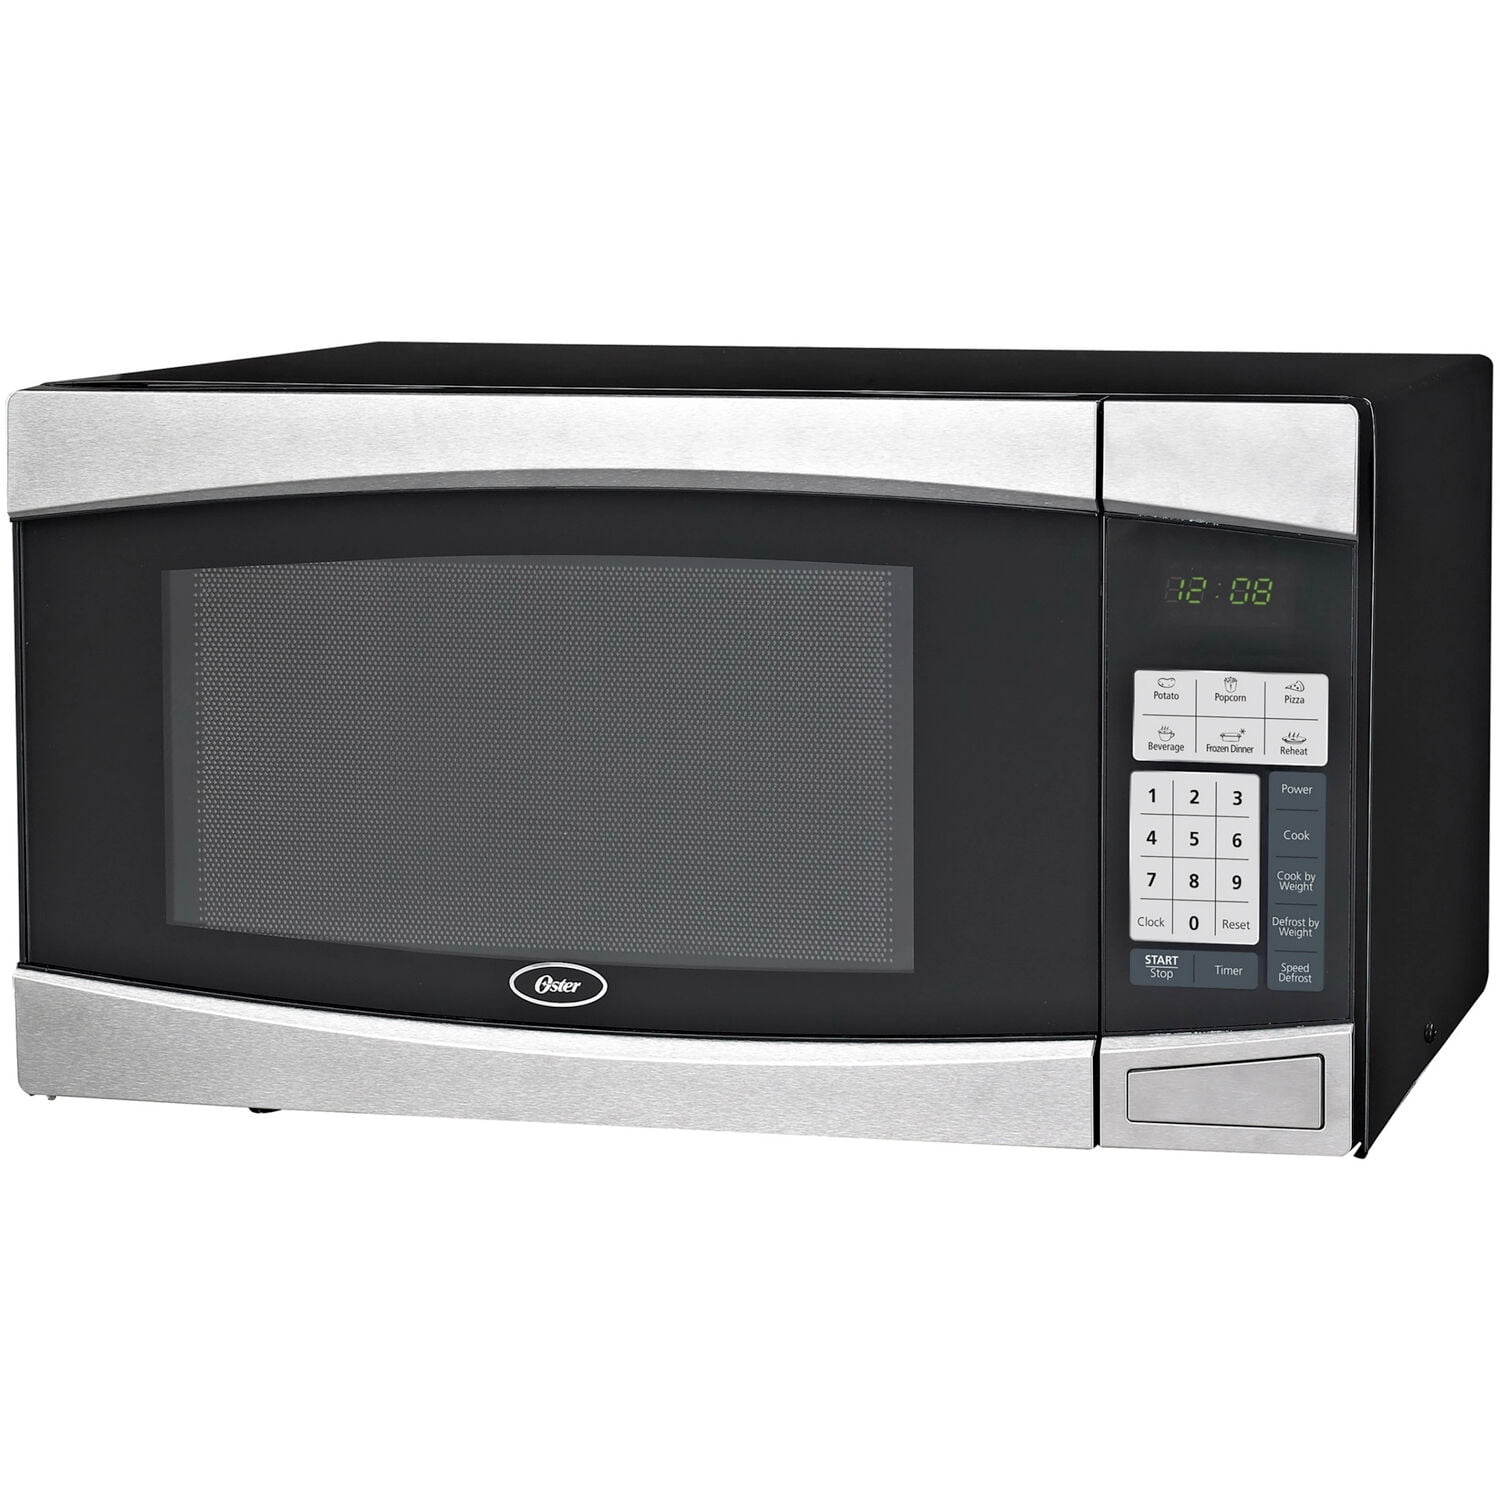 Oster Mid-Size 1.1-Cu. ft. 1000W Countertop Microwave Oven with